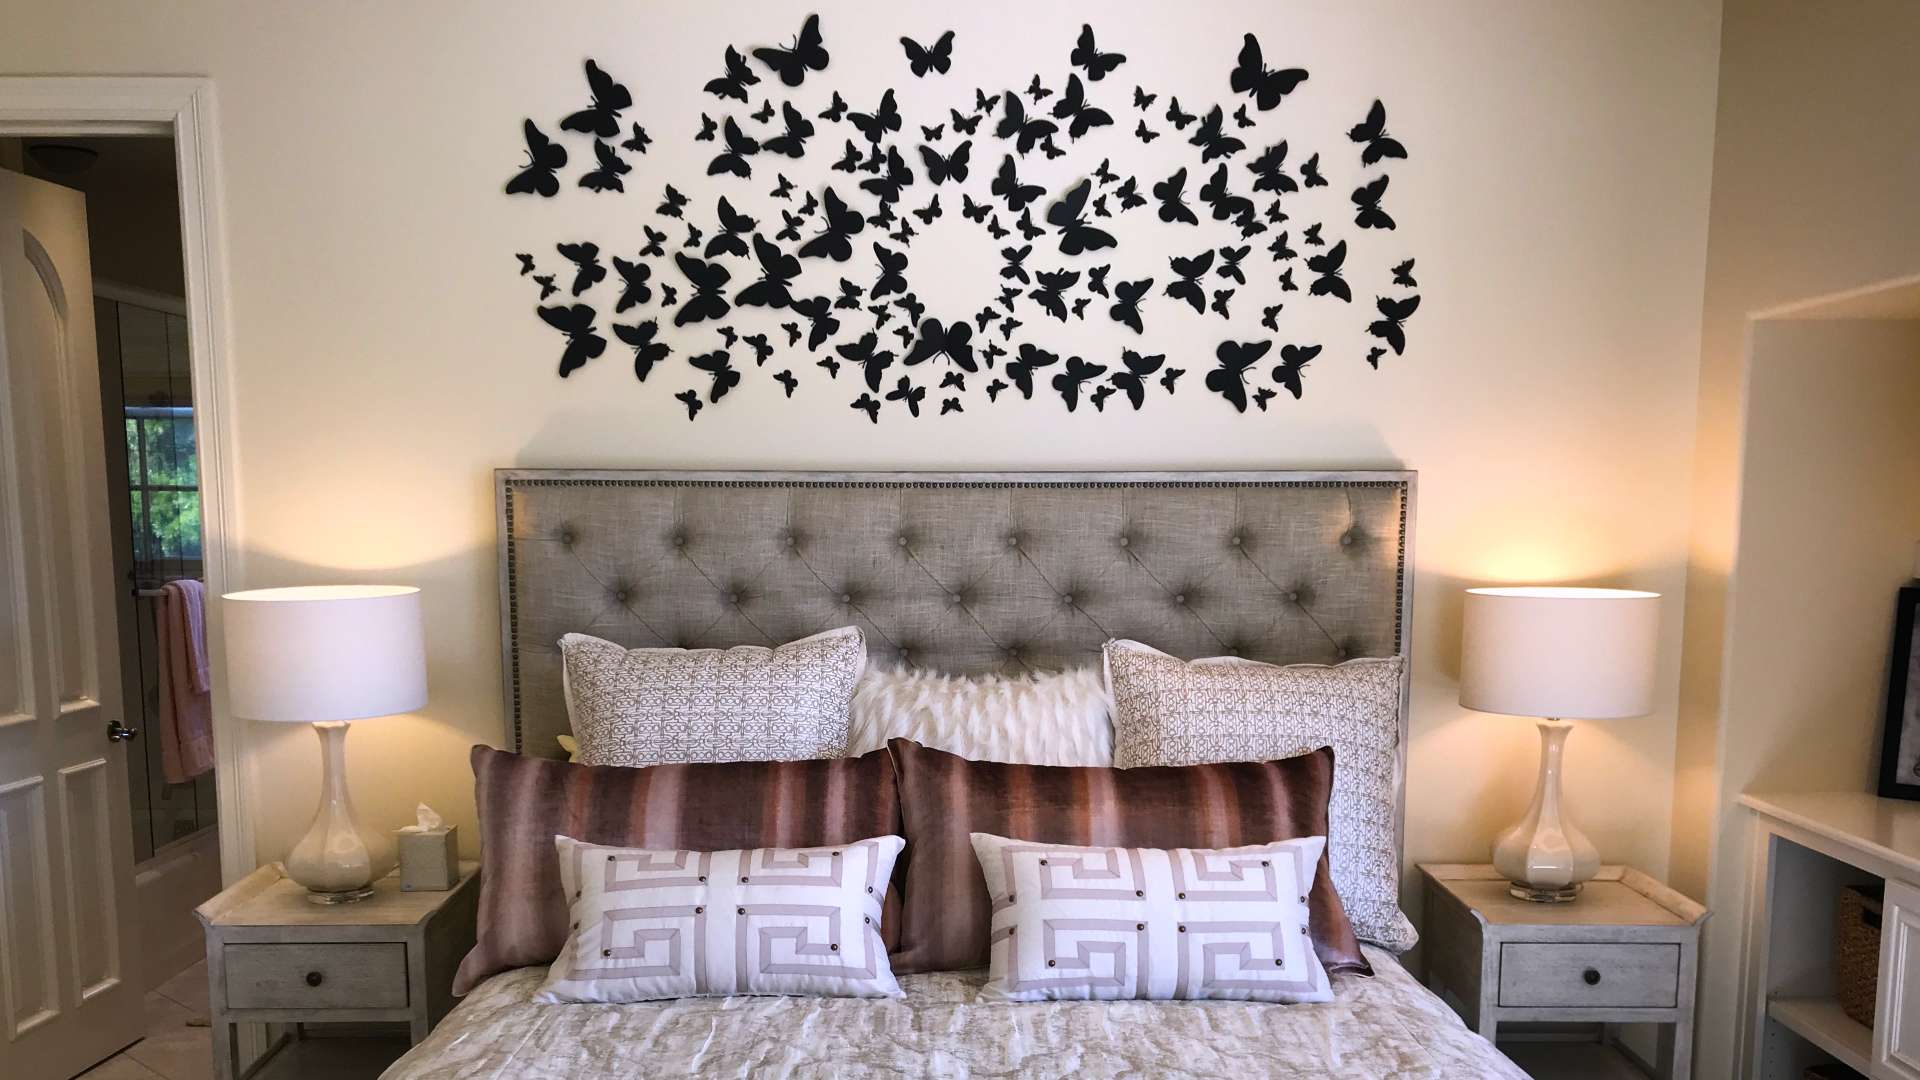 A bed with pillows and a wall of butterflies.